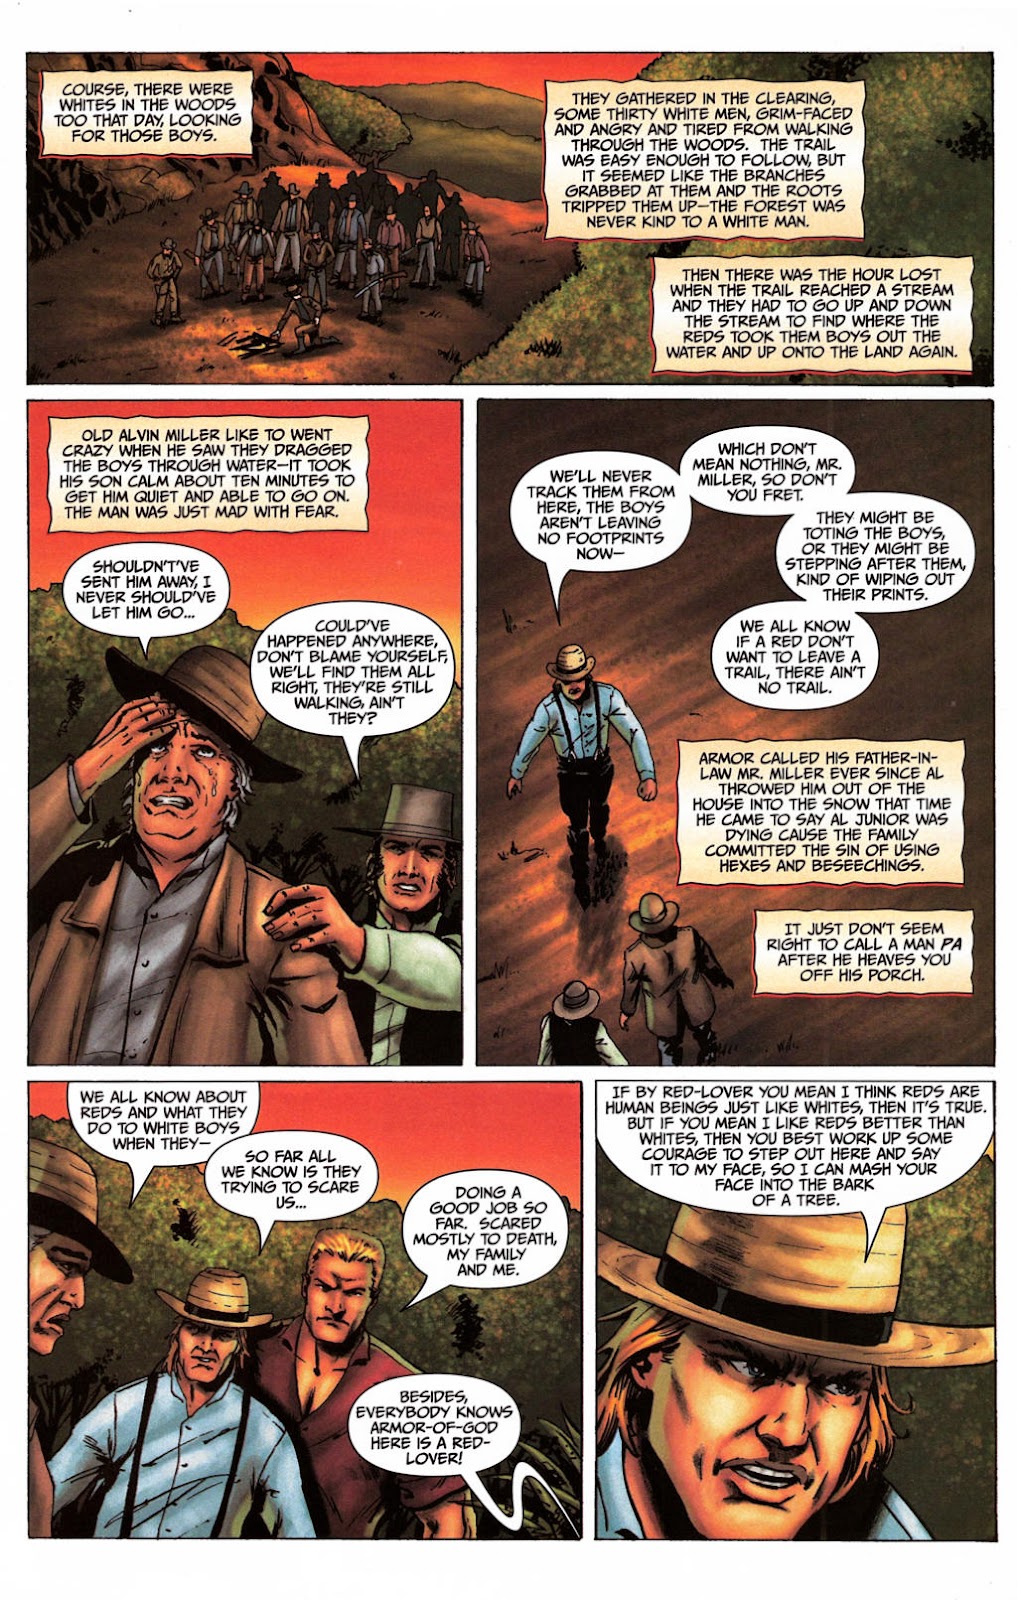 Red Prophet: The Tales of Alvin Maker issue 5 - Page 21